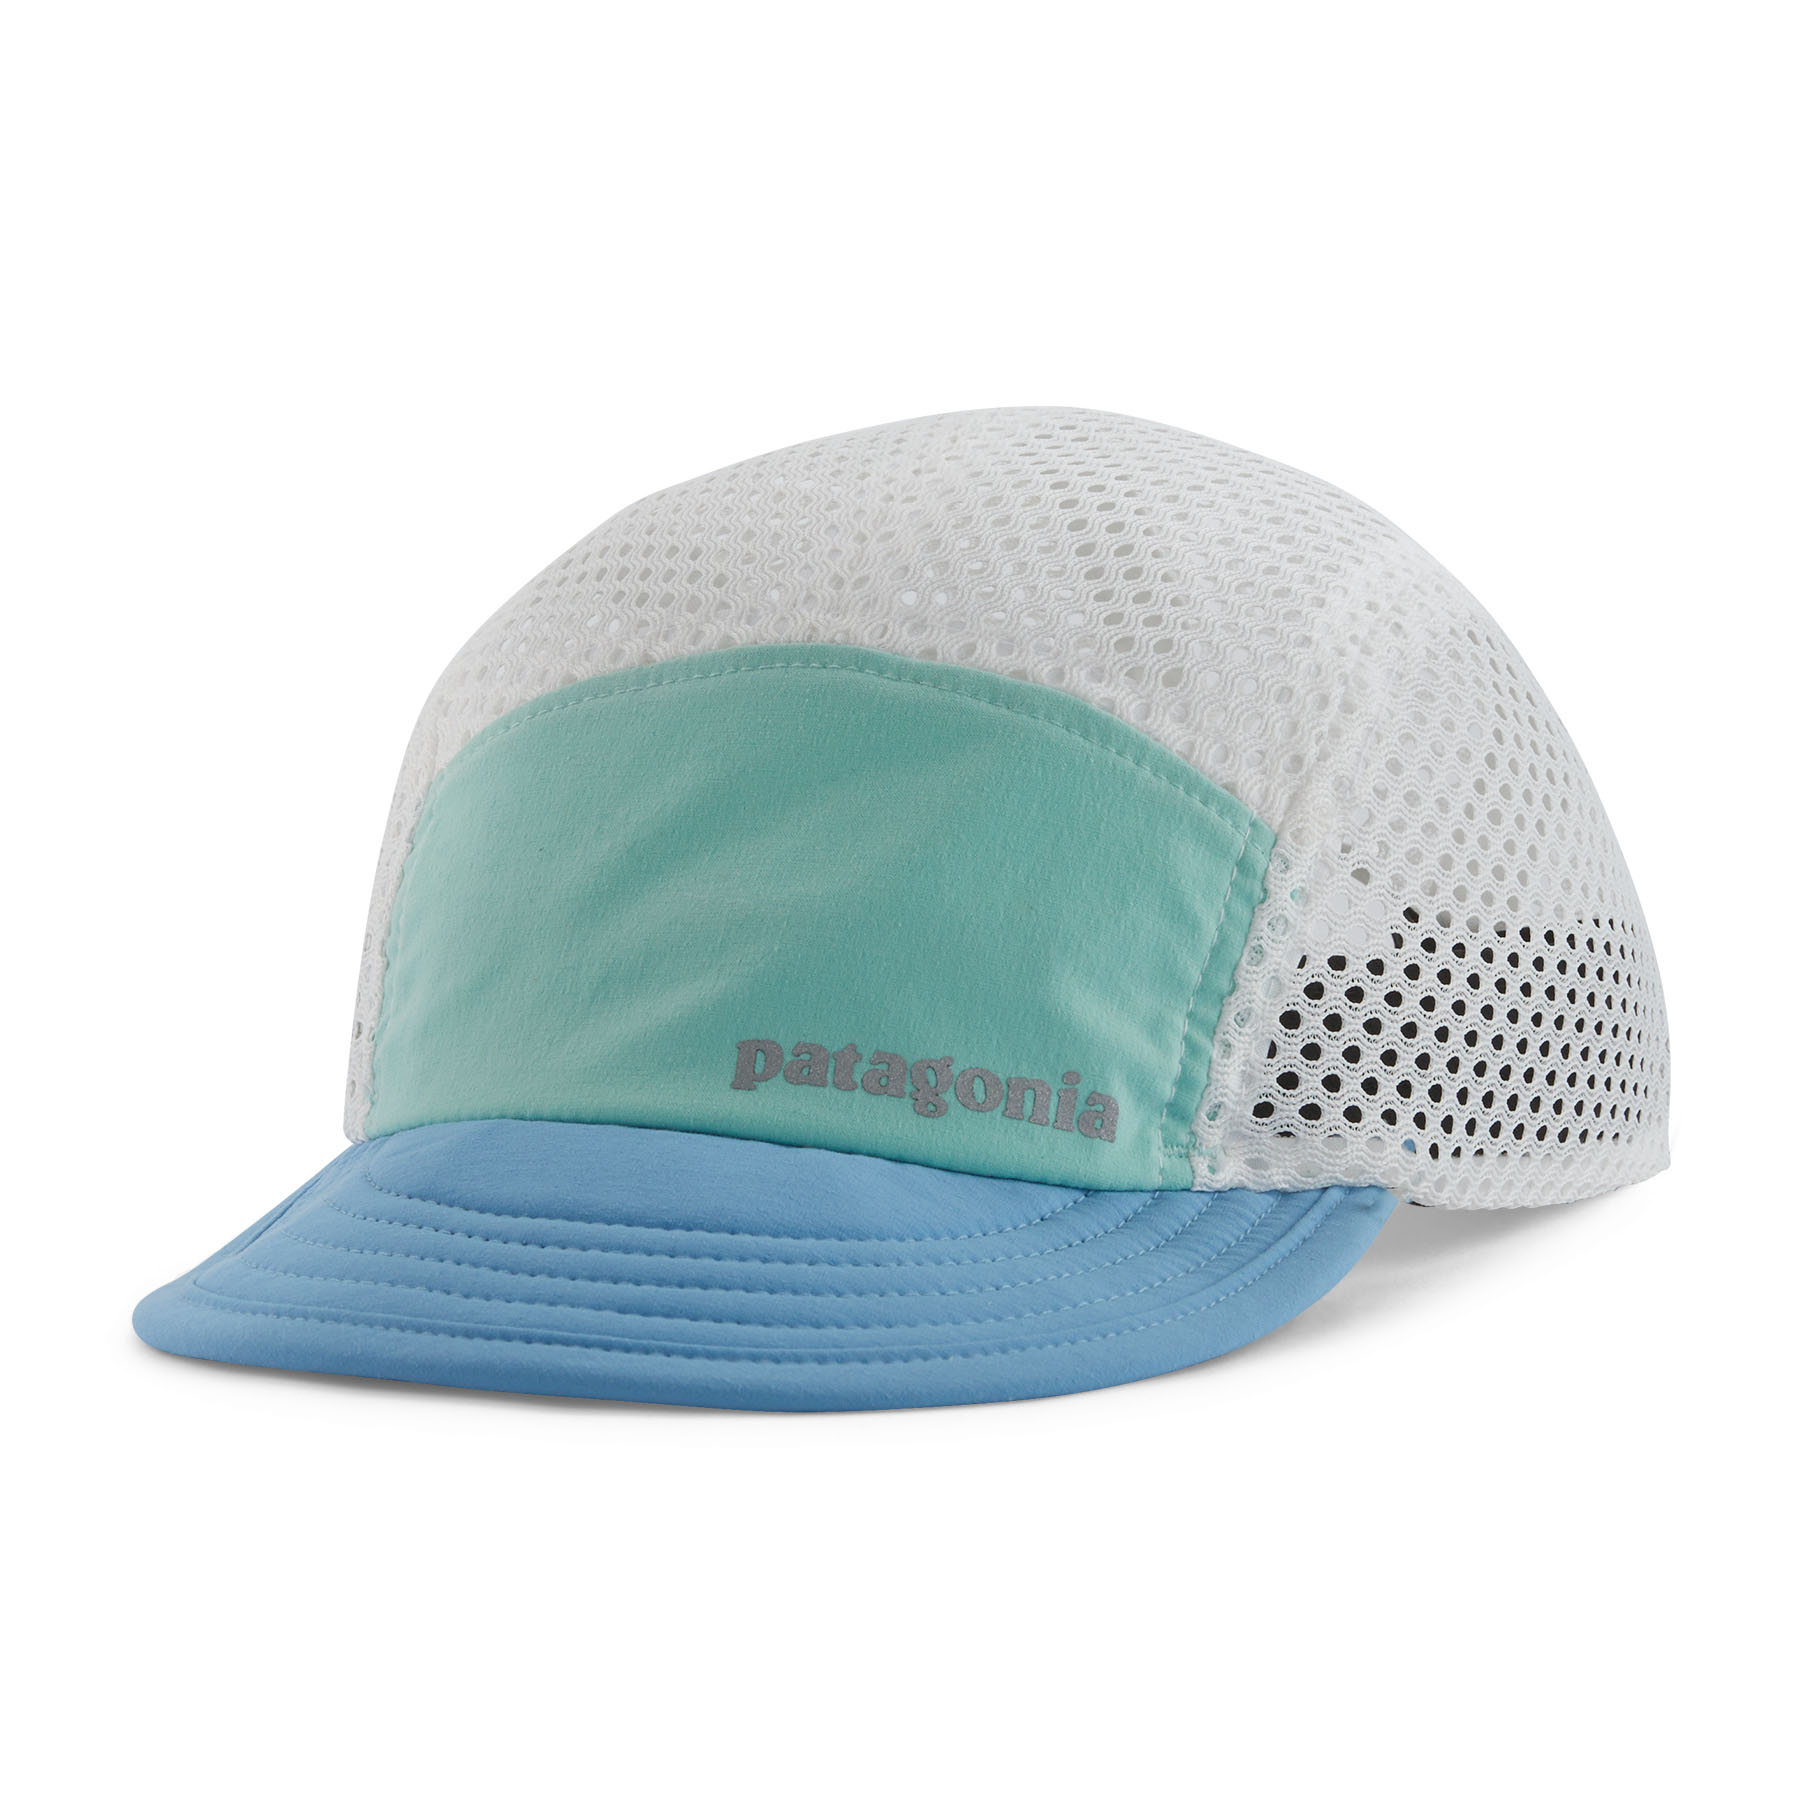 PATAGONIA Duckbill Cap Early Teal